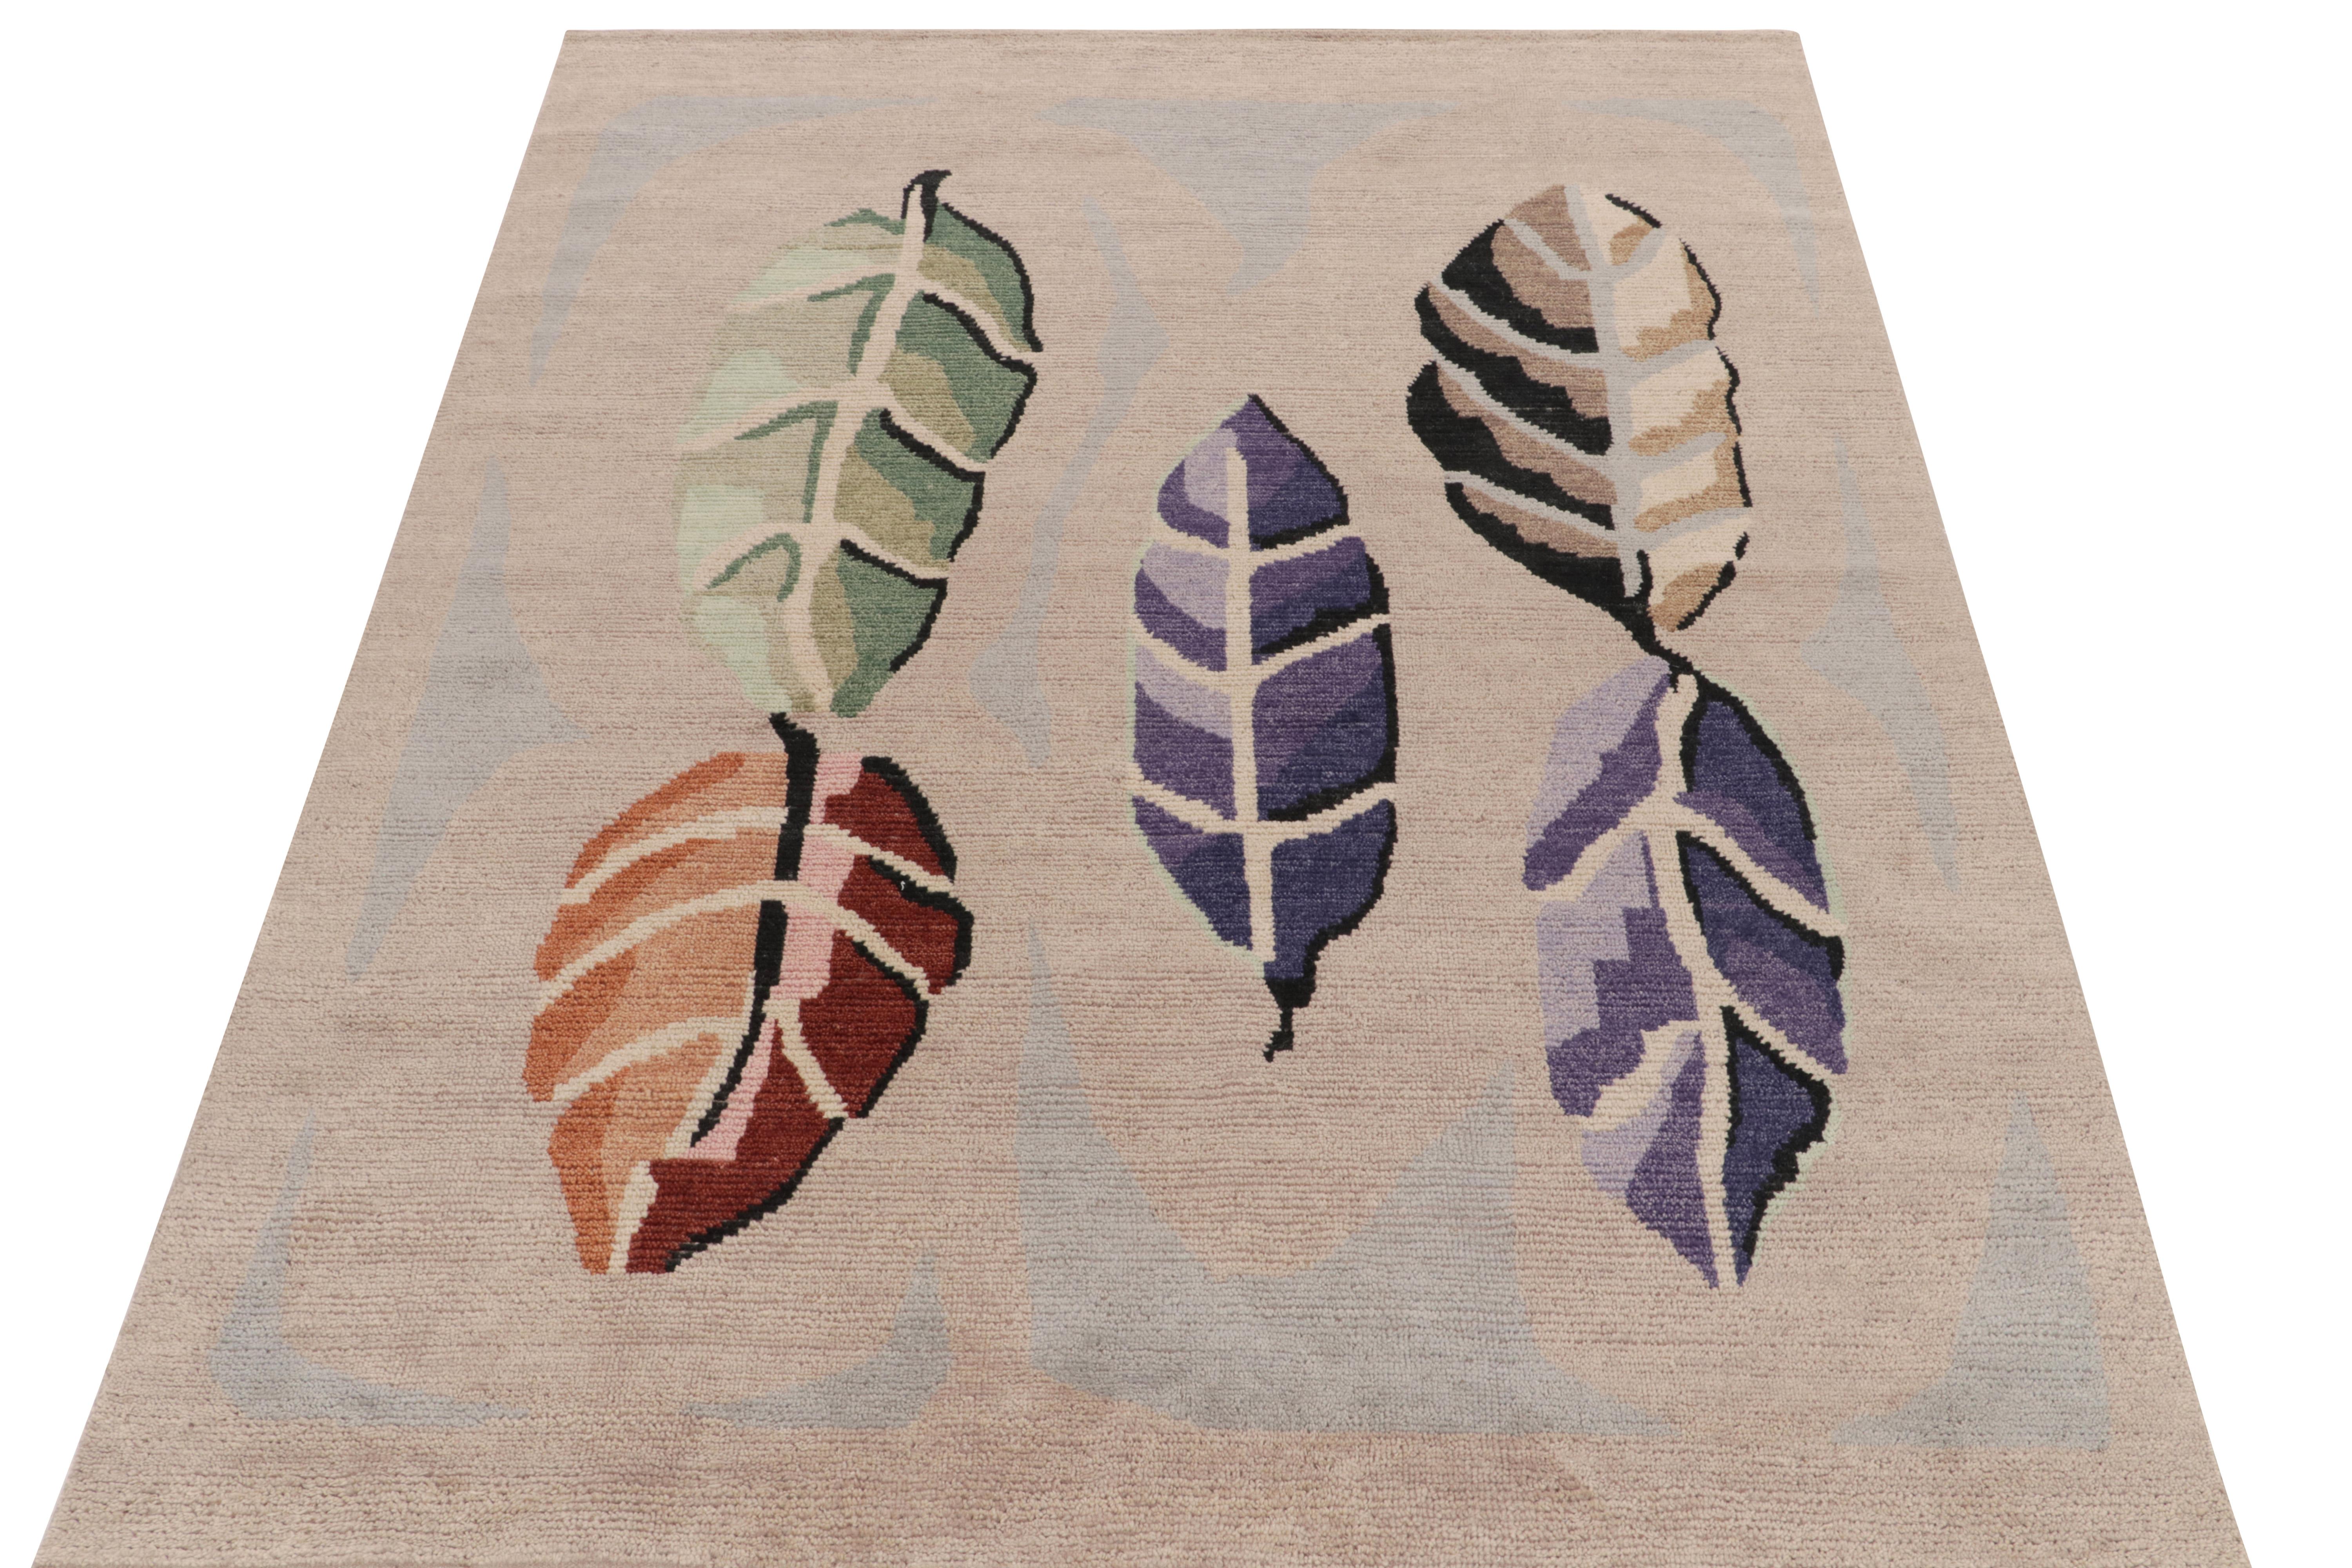 Inspired by the finest vintage Swedish rya rugs, a 6x8 handwoven piece from our award winning Scandinavian selections. The luscious pile texture ushers in a beige-brown, orange, indigo & green toned foliage discovering a new, outstanding definition